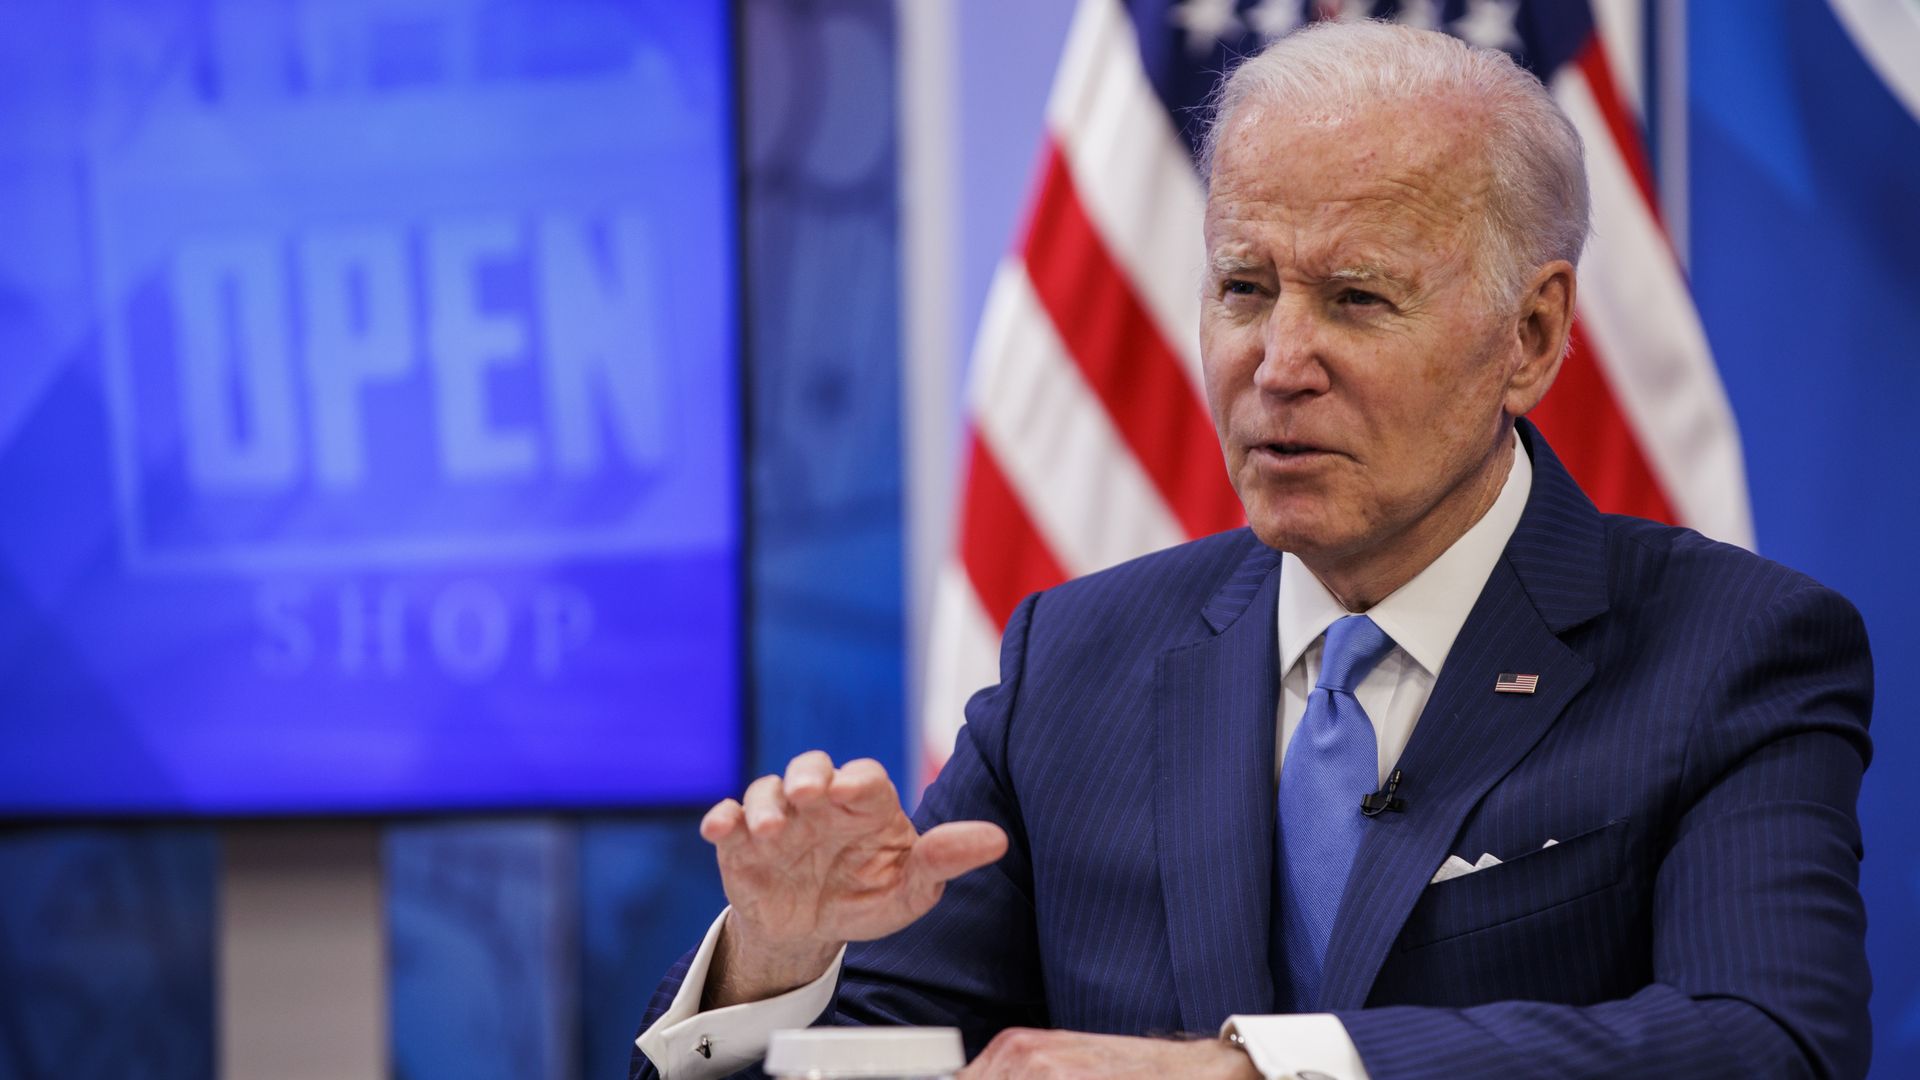 President Biden is seen speaking Thursday at a Small Business event.